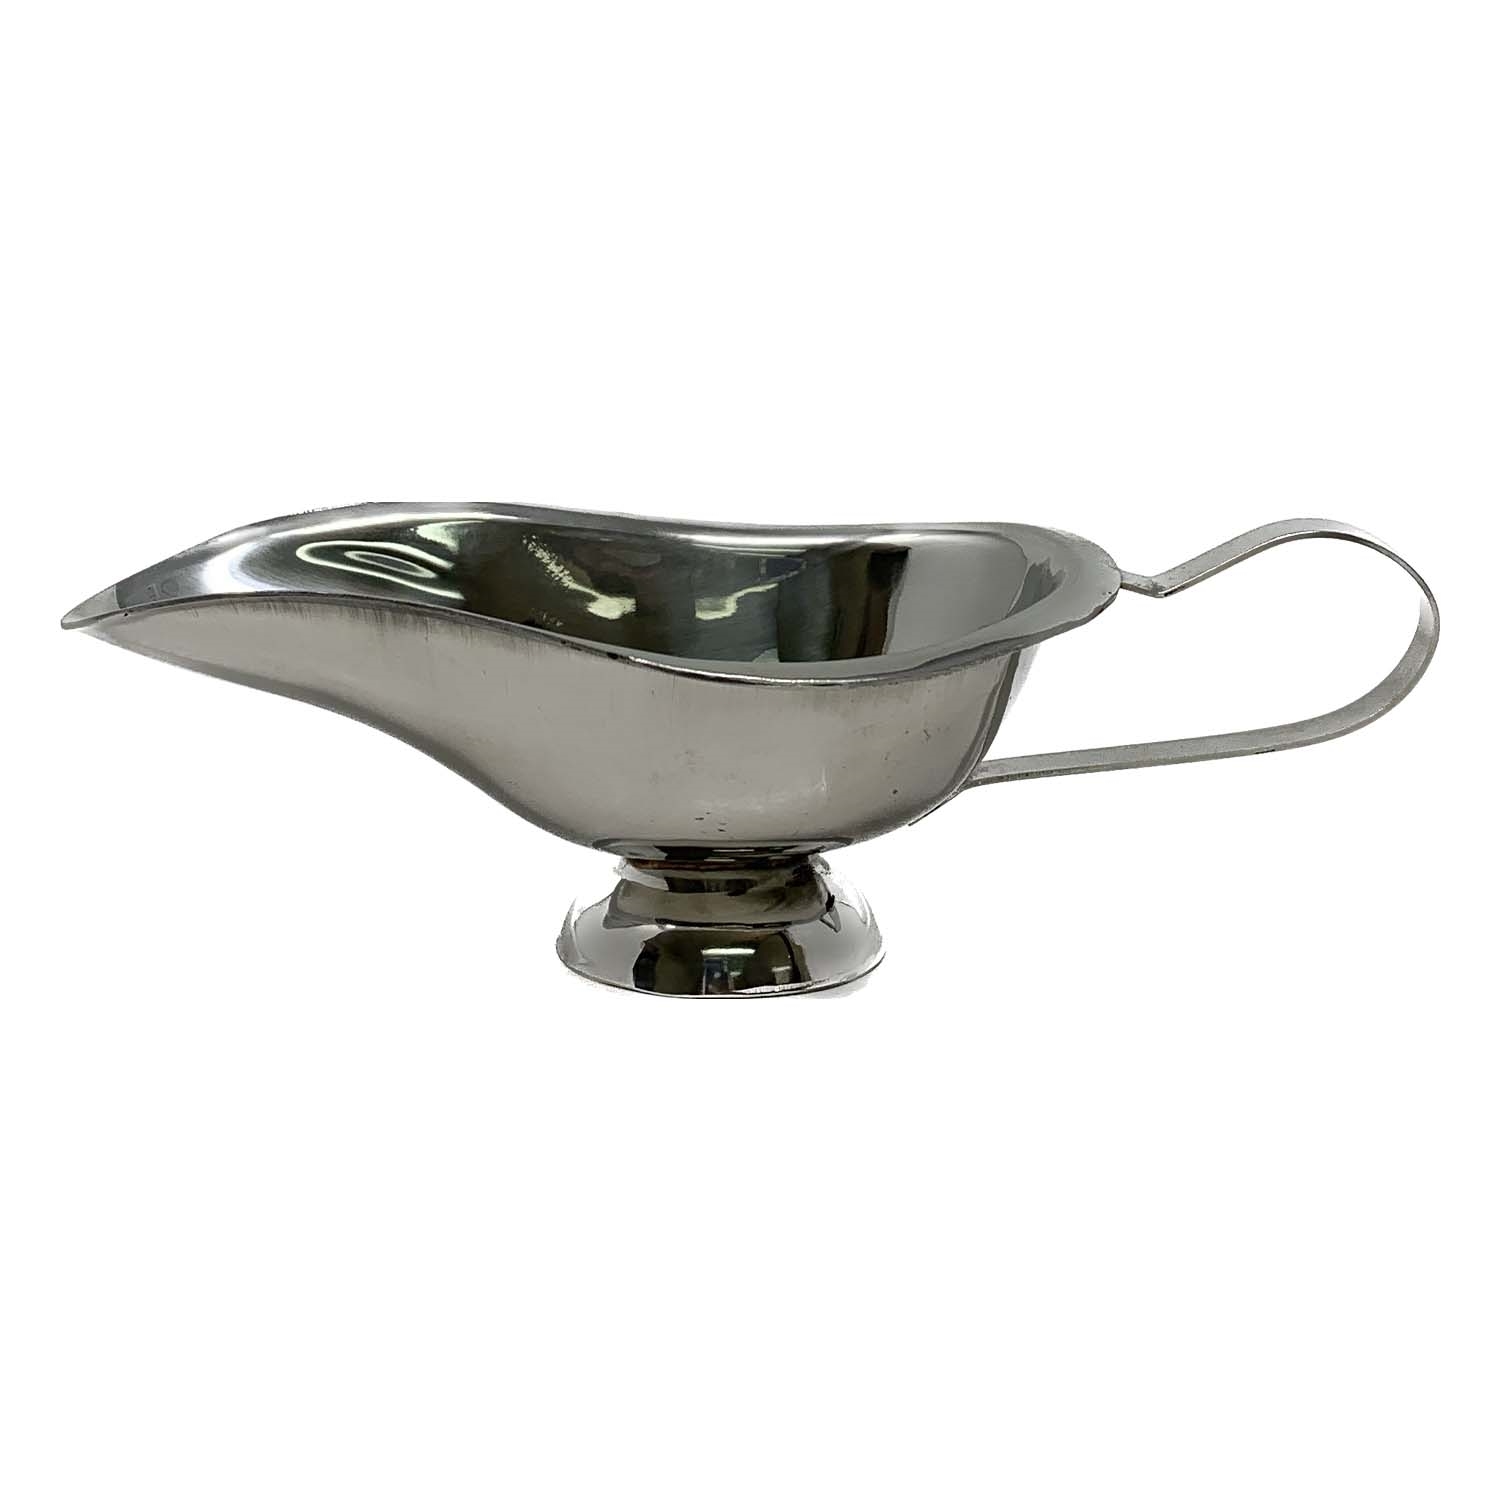 Stainless Steel  Sauce Boat, Saucier with Ergonomic Handle and Big Dripless Lip Spout, Commercial Quality Sauce Boat 5 oz